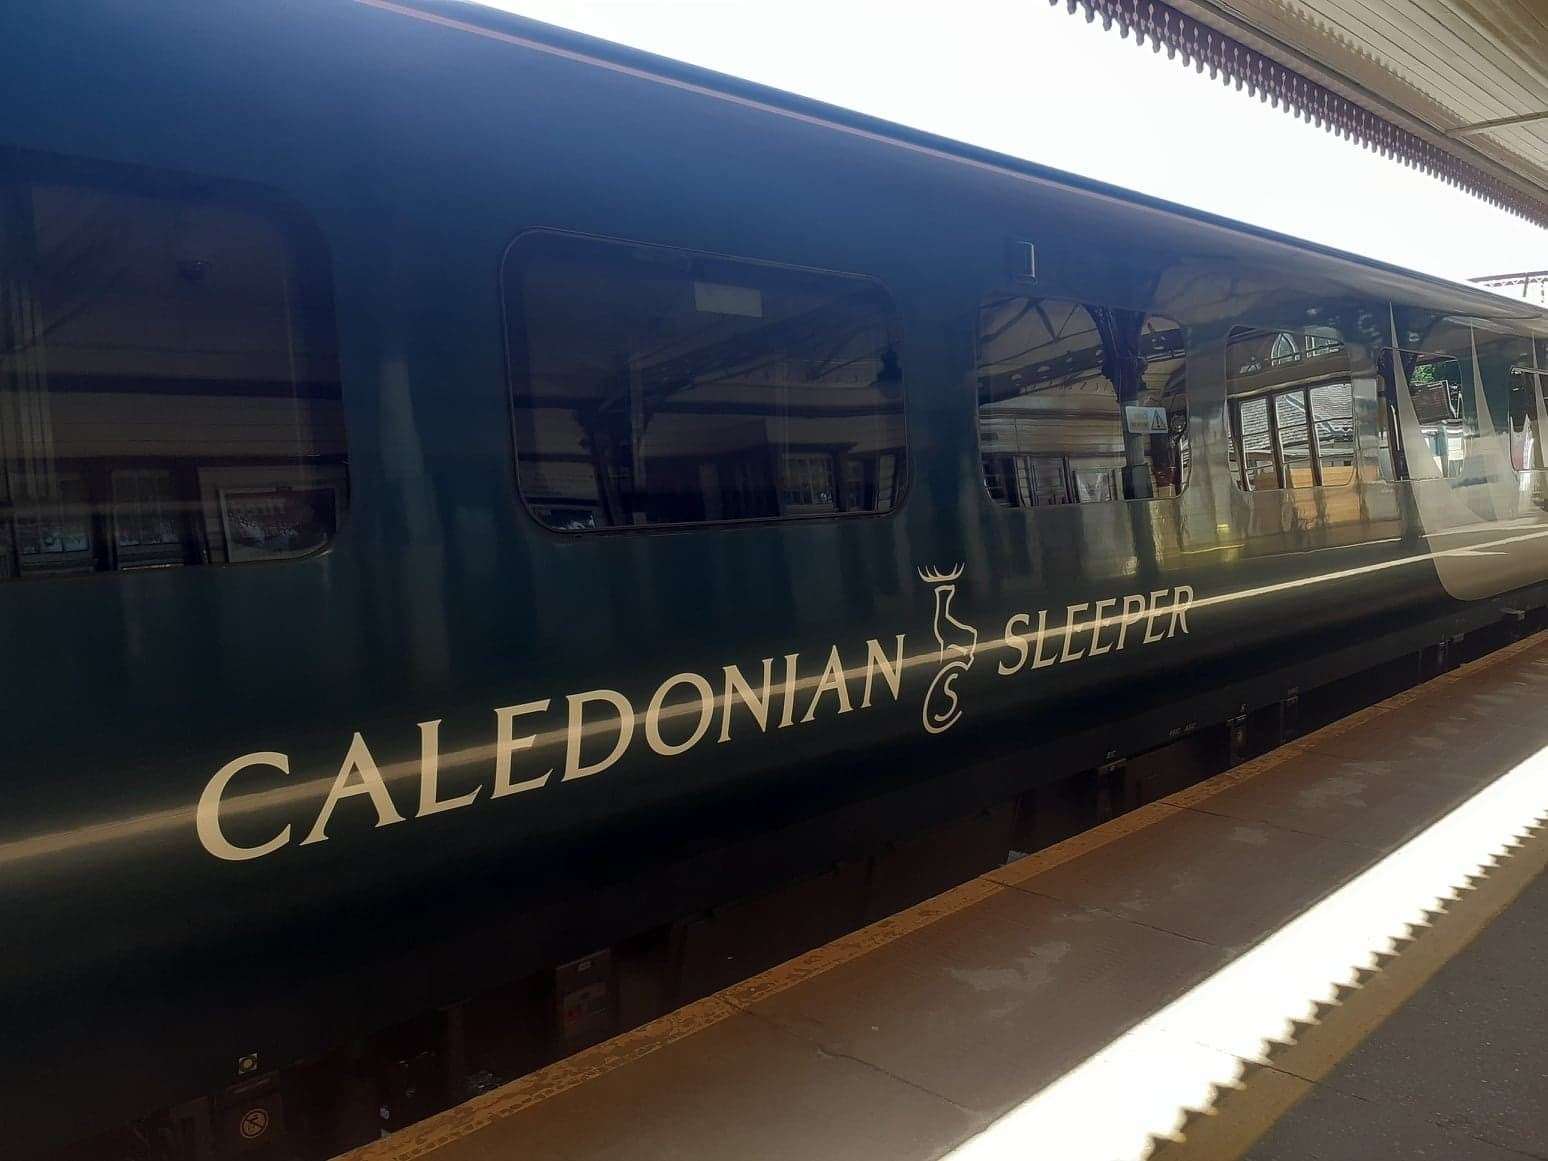 The Caledonian Sleeper is set to have a new operator from this summer.